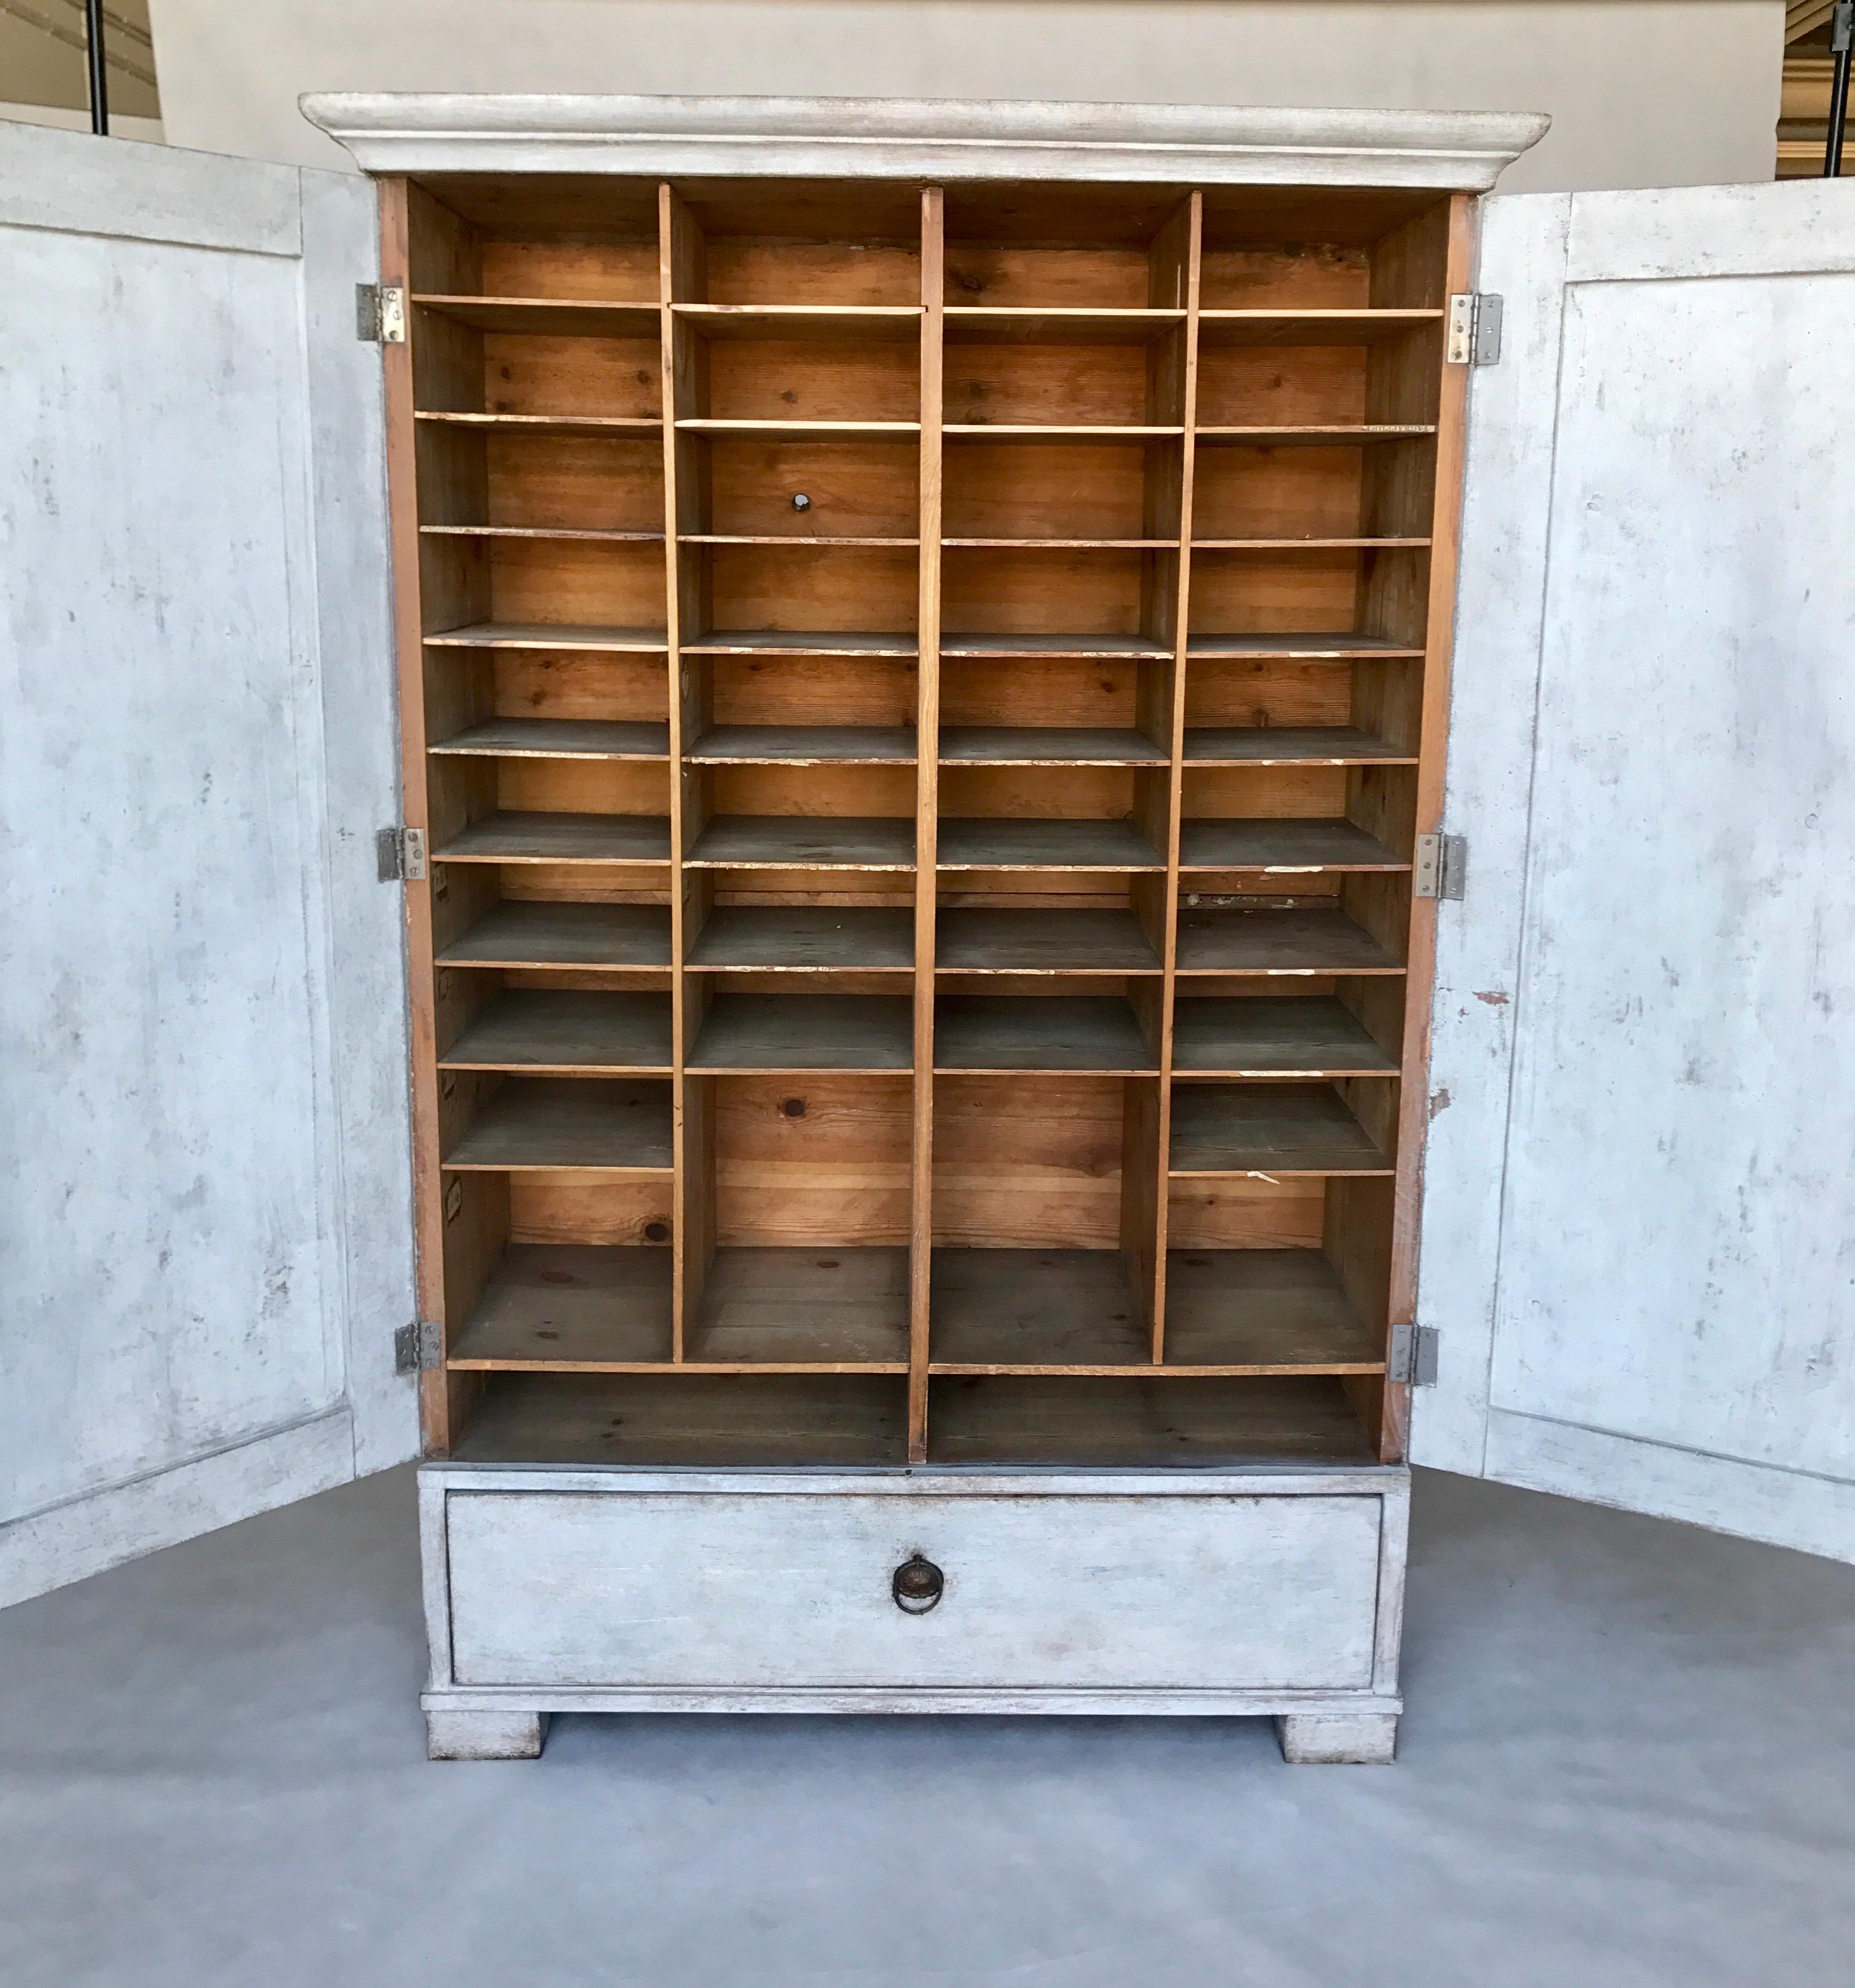 The office cabinet of the Skane from Sweden. The piece has many small shelfs inside. It is a great work organizer. There is one large drawer in the lower part of the cabinet. The furniture has original fittings and locks.
Exterior color light gray.